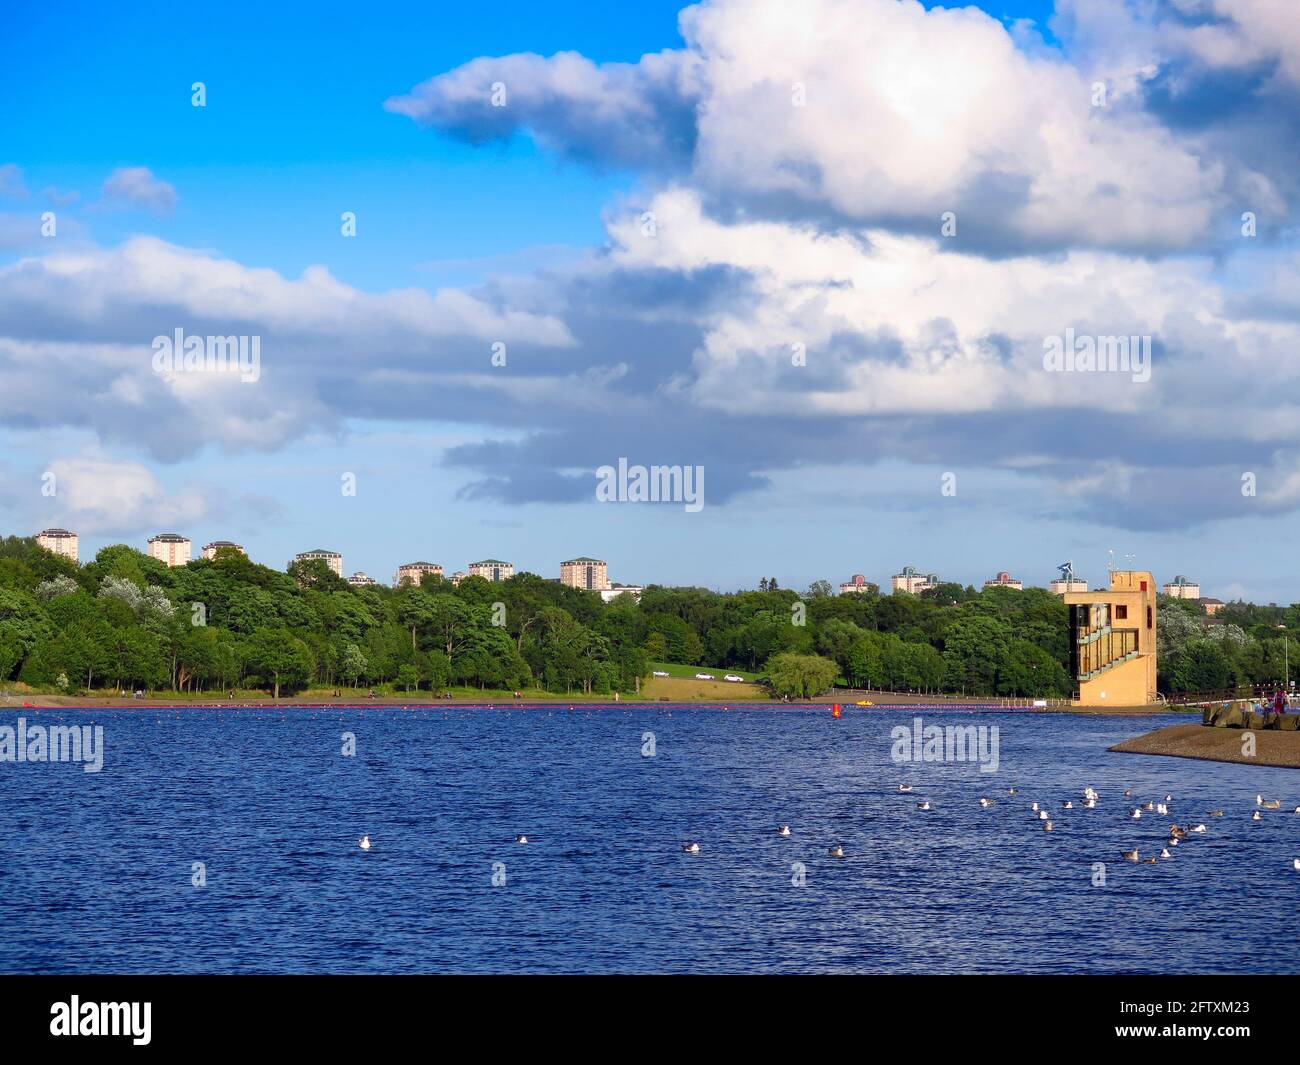 National Rowing Center Strathclyde Park torre di osservazione Foto Stock